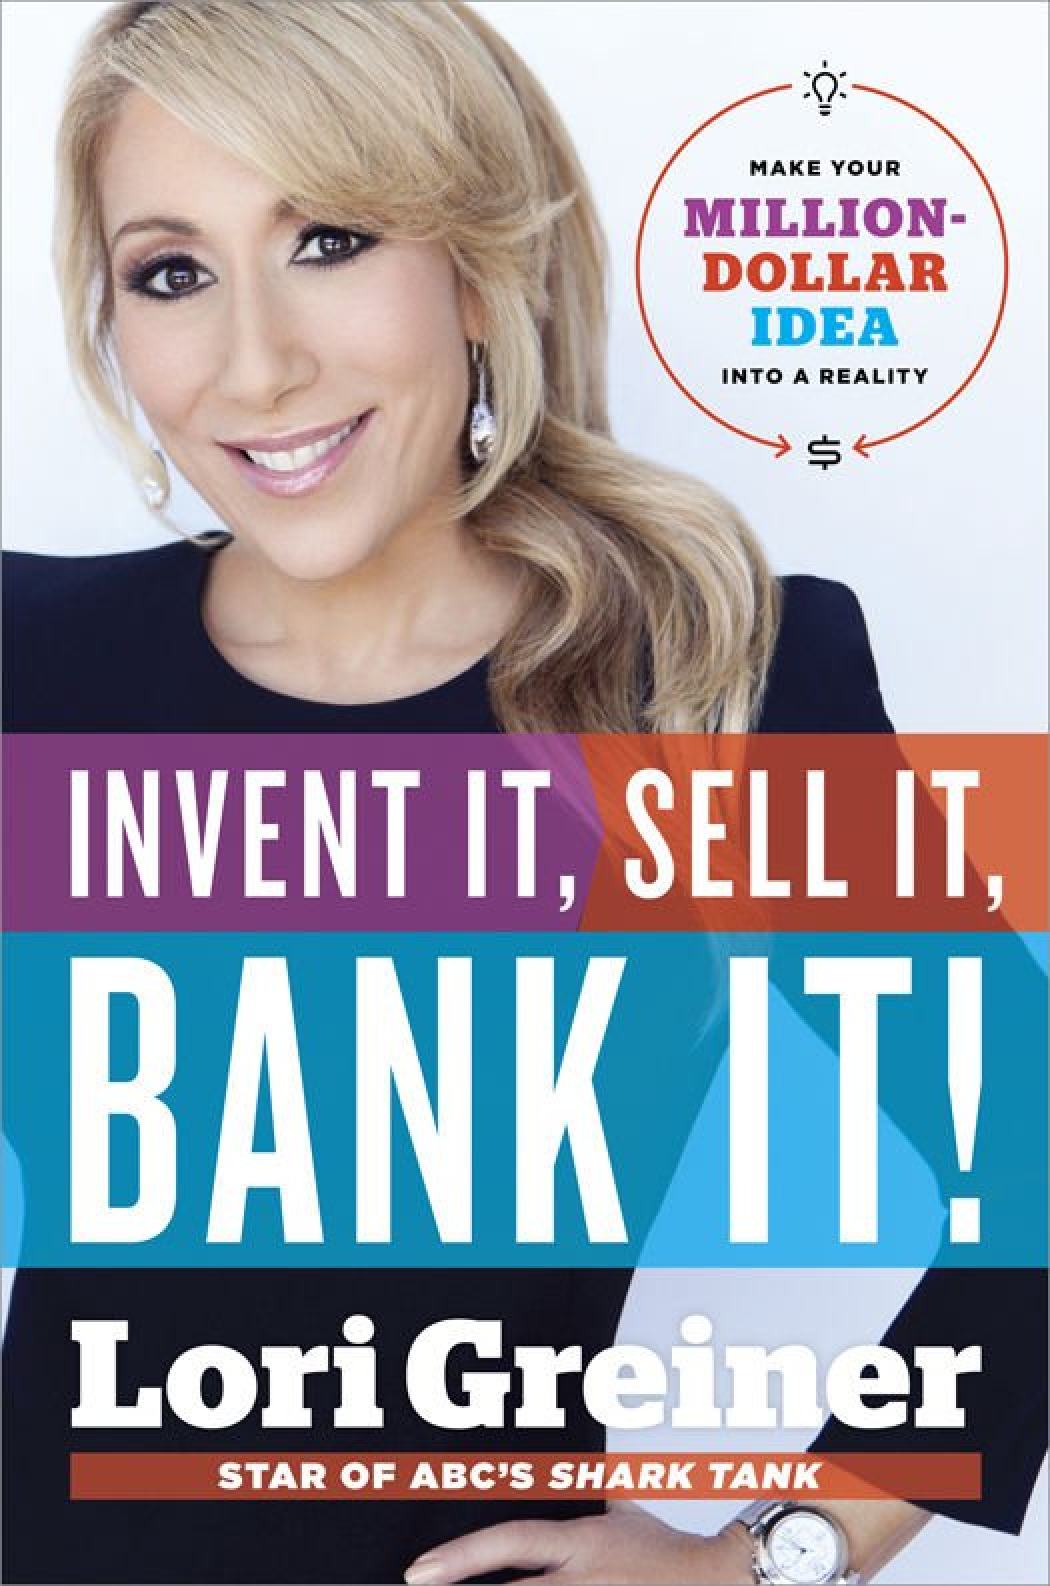 The 100+ Women-Owned Businesses That Made It On 'Shark Tank